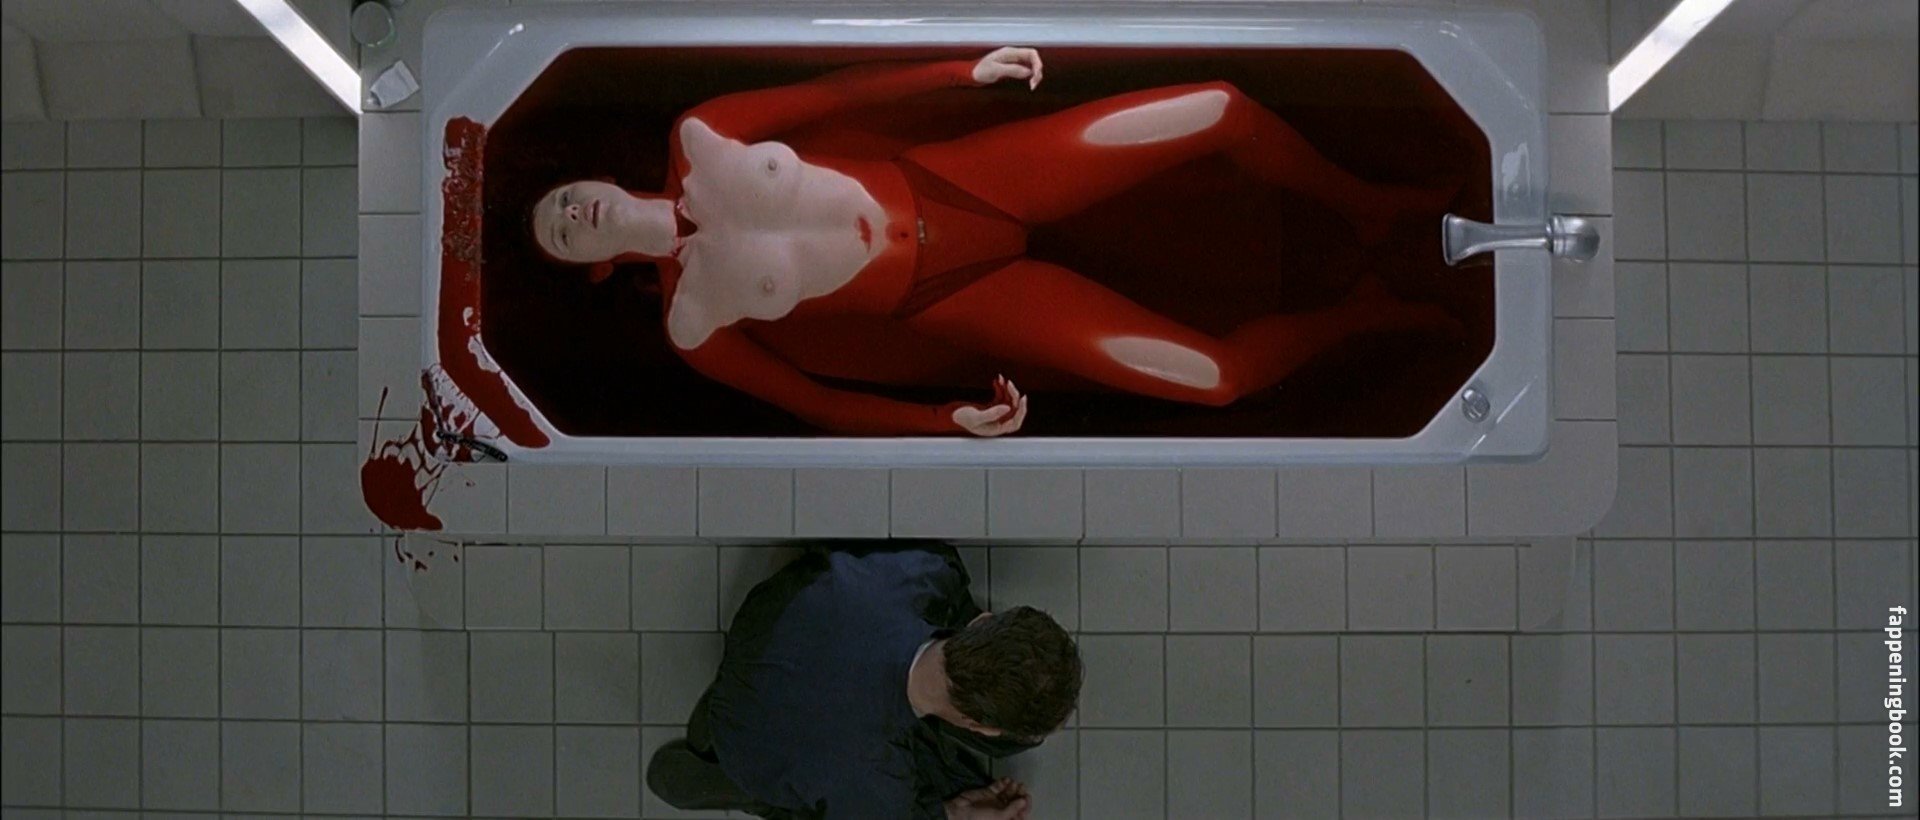 Nude Roles in Movies: Event Horizon (1997), The Crow: City of Angels (1996)...